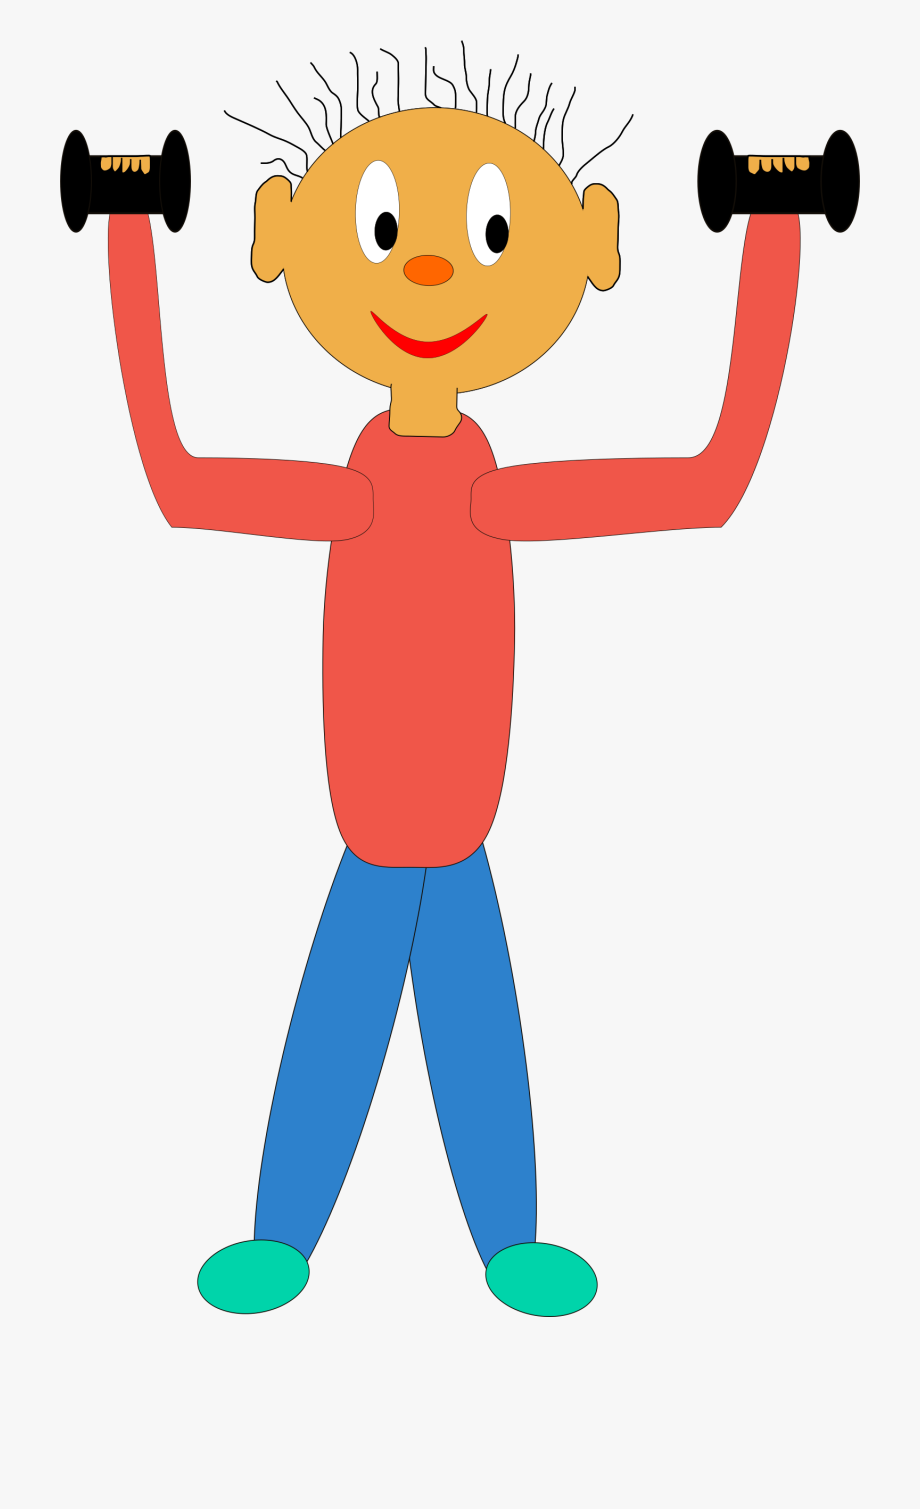 Dumbbells clipart kid. Exercising fitness png image